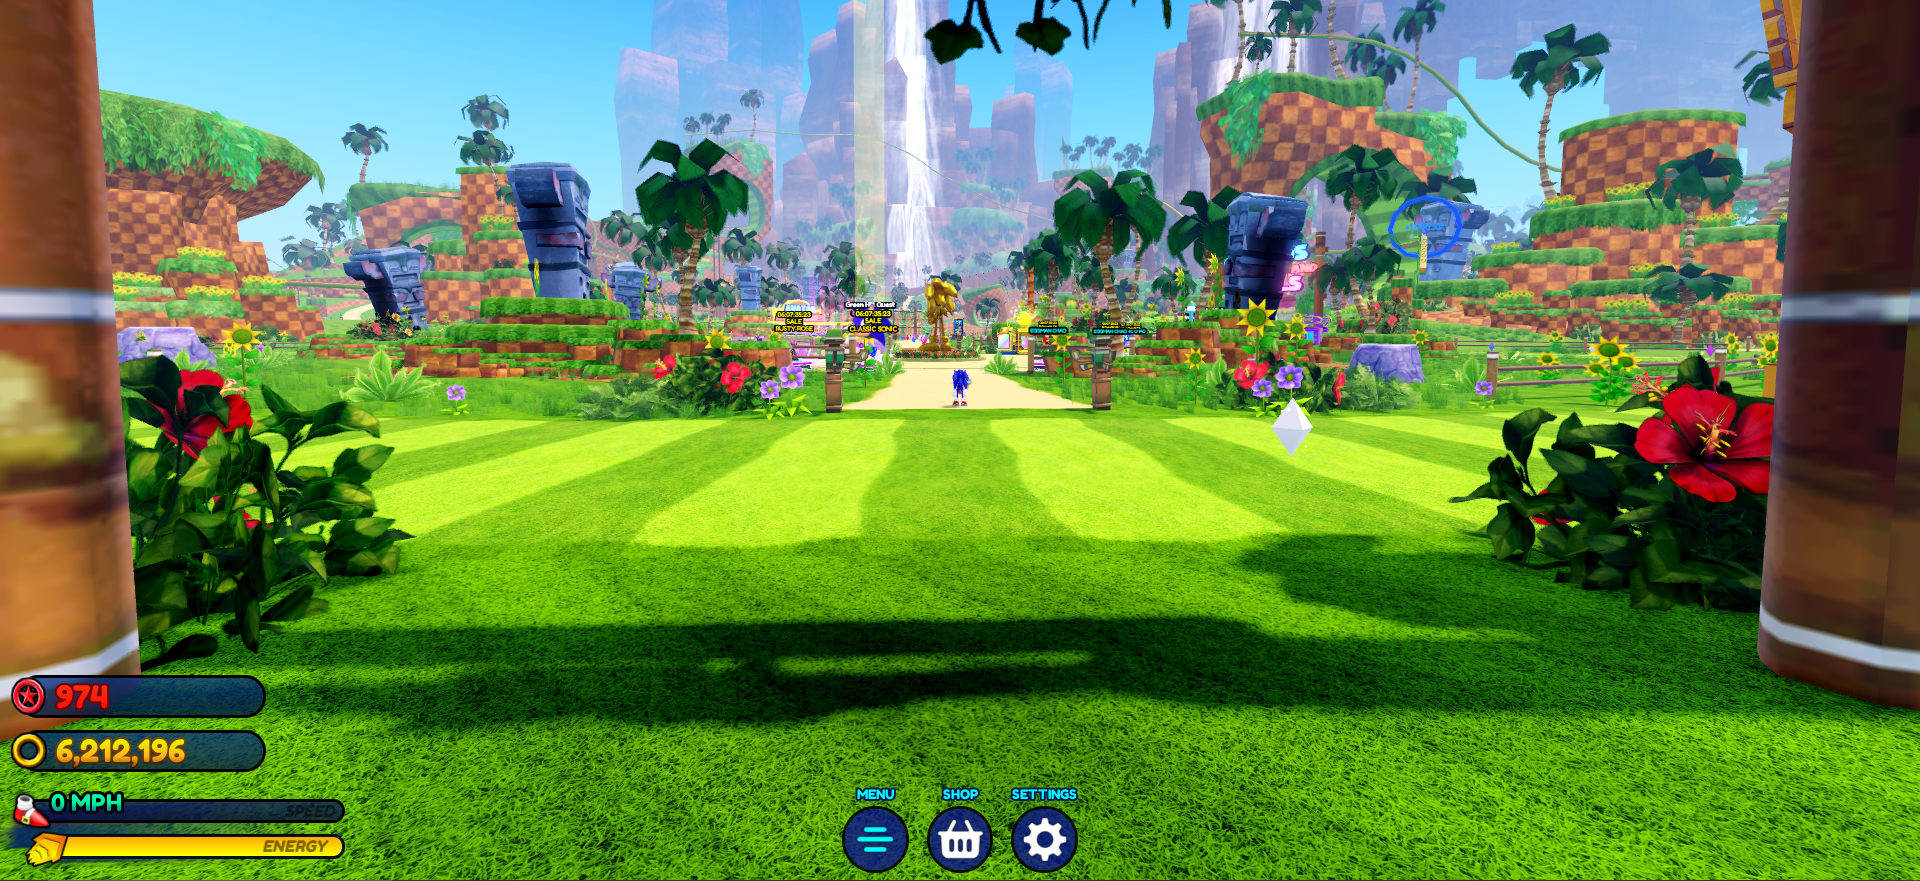 SONIC SPEED SIMULATOR 2! FIRST LOOK AT NEW GREEN HILL 